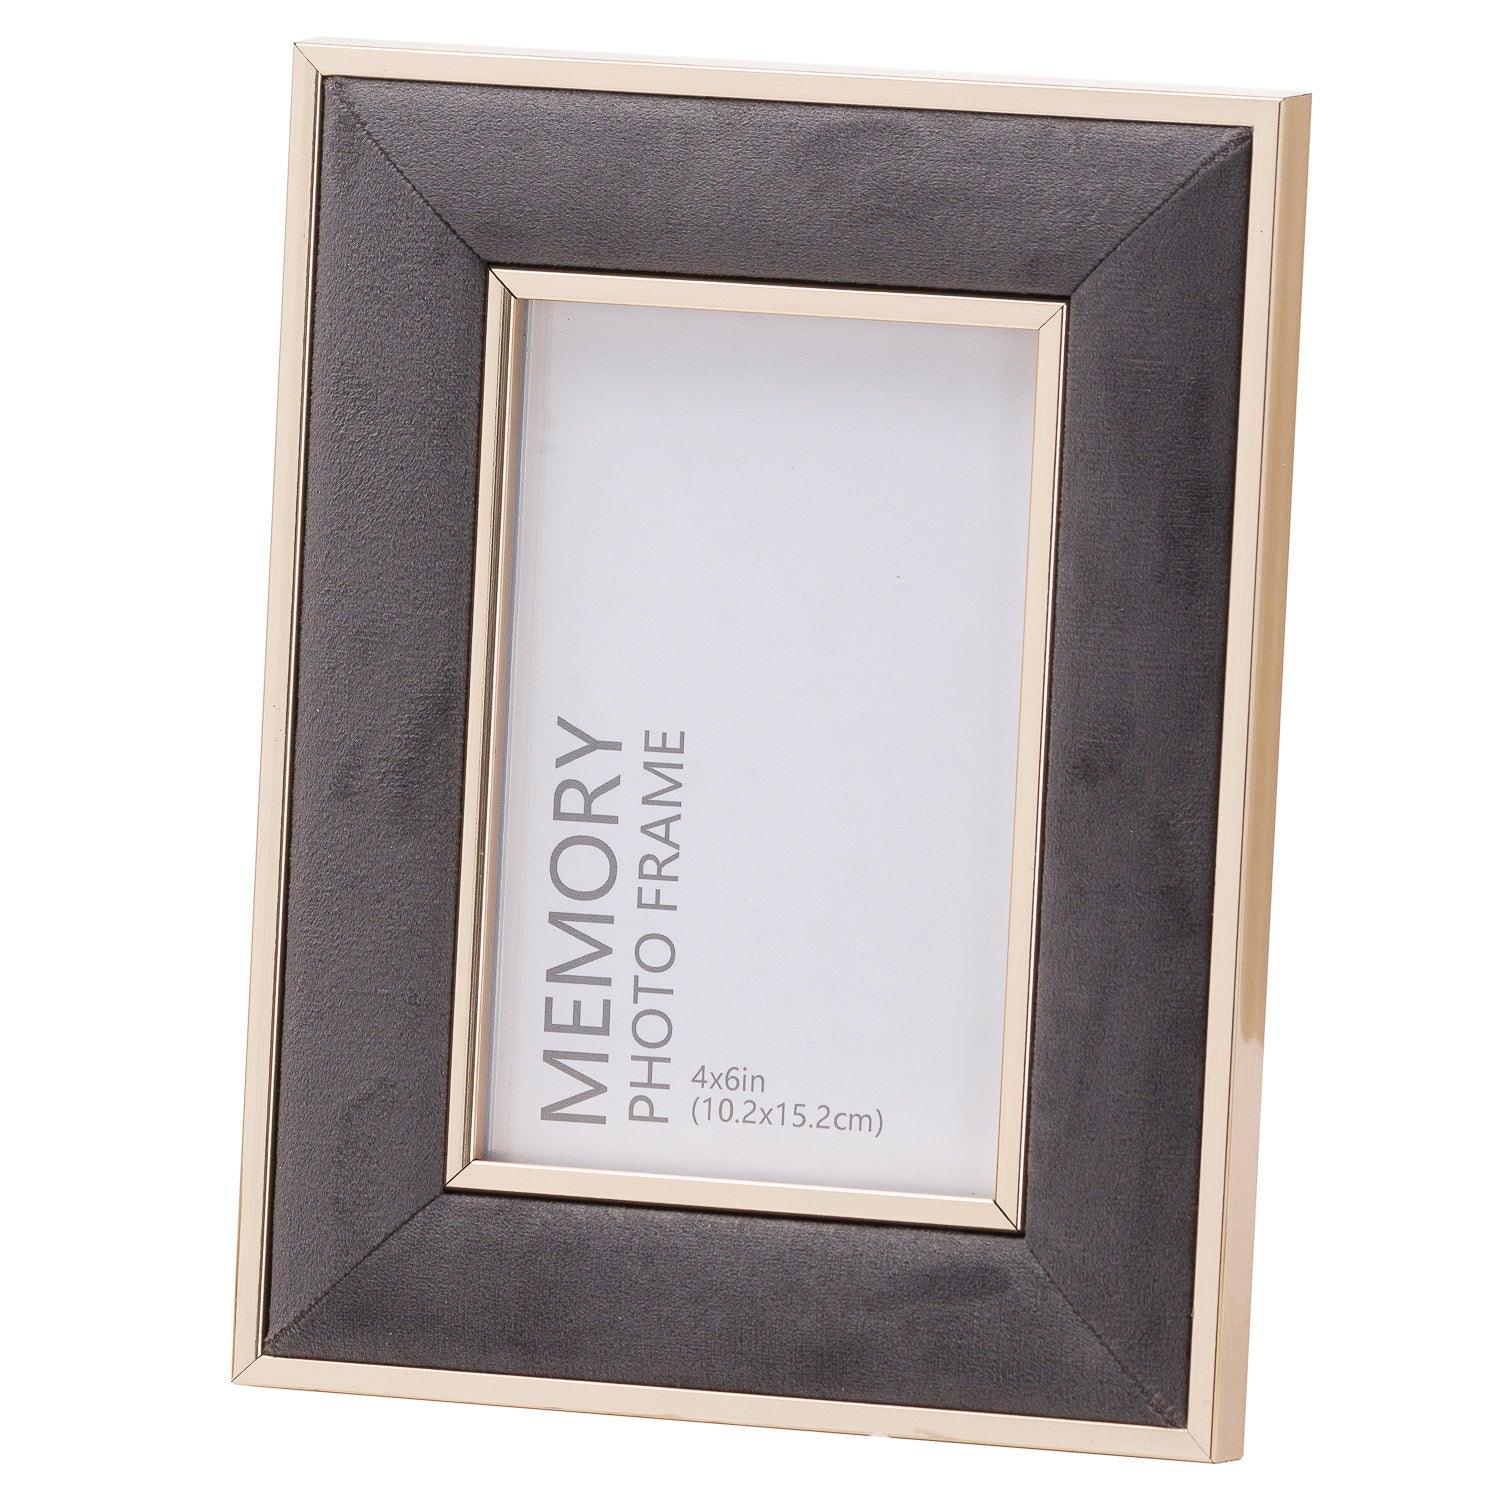 View Grey Velvet With Gold 4X6 Frame information